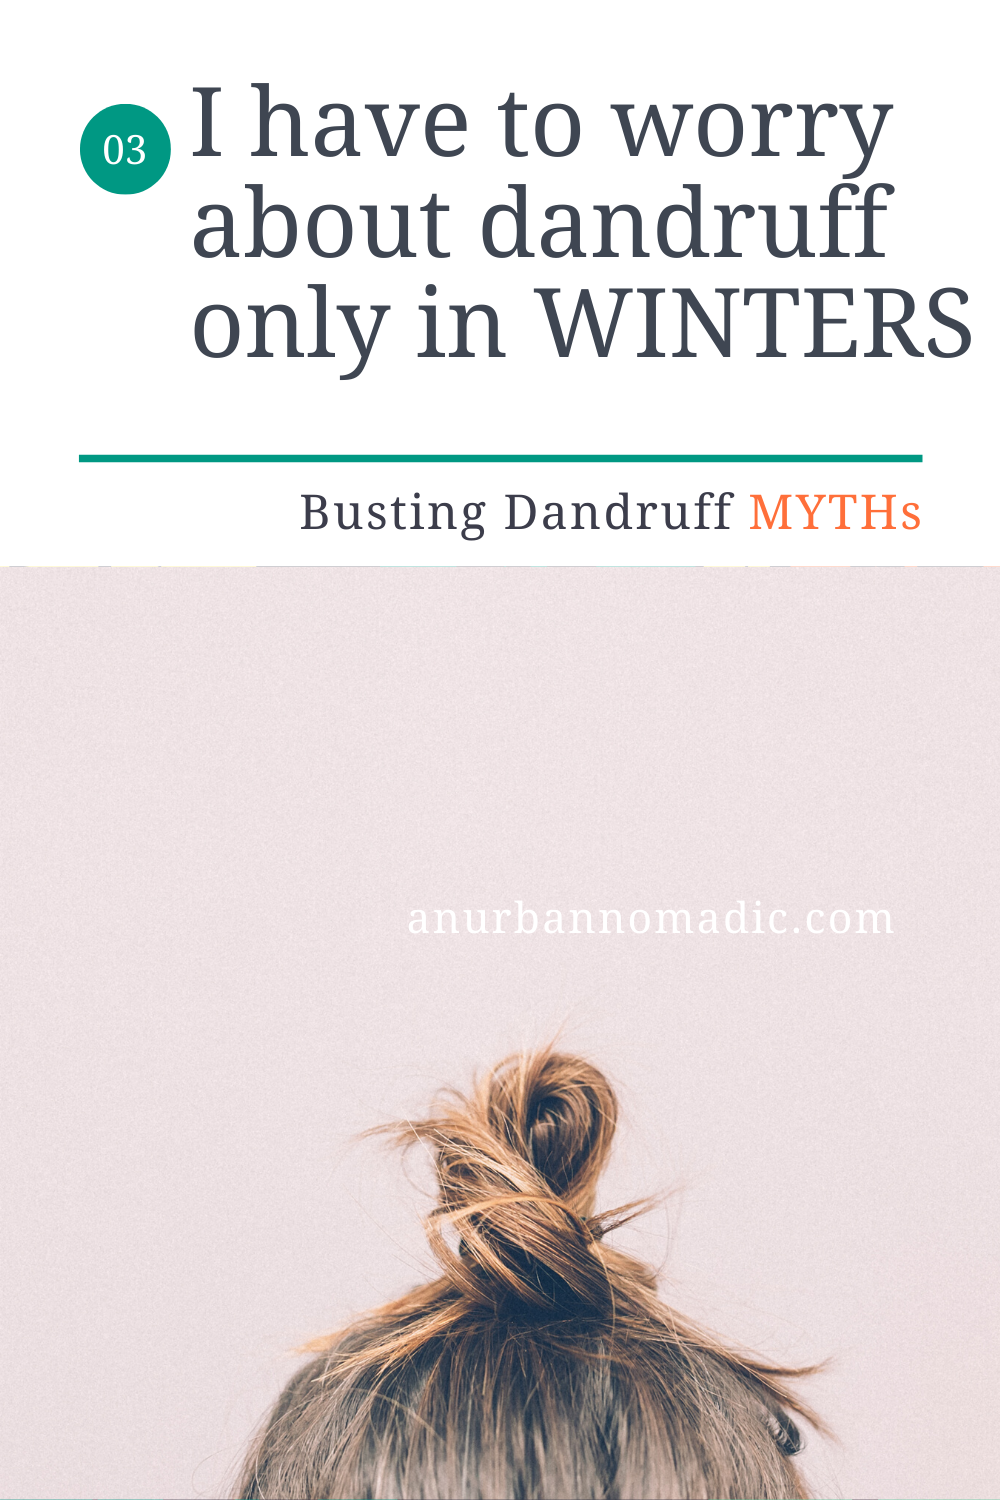 Do I have to worry about dandruff only in winters